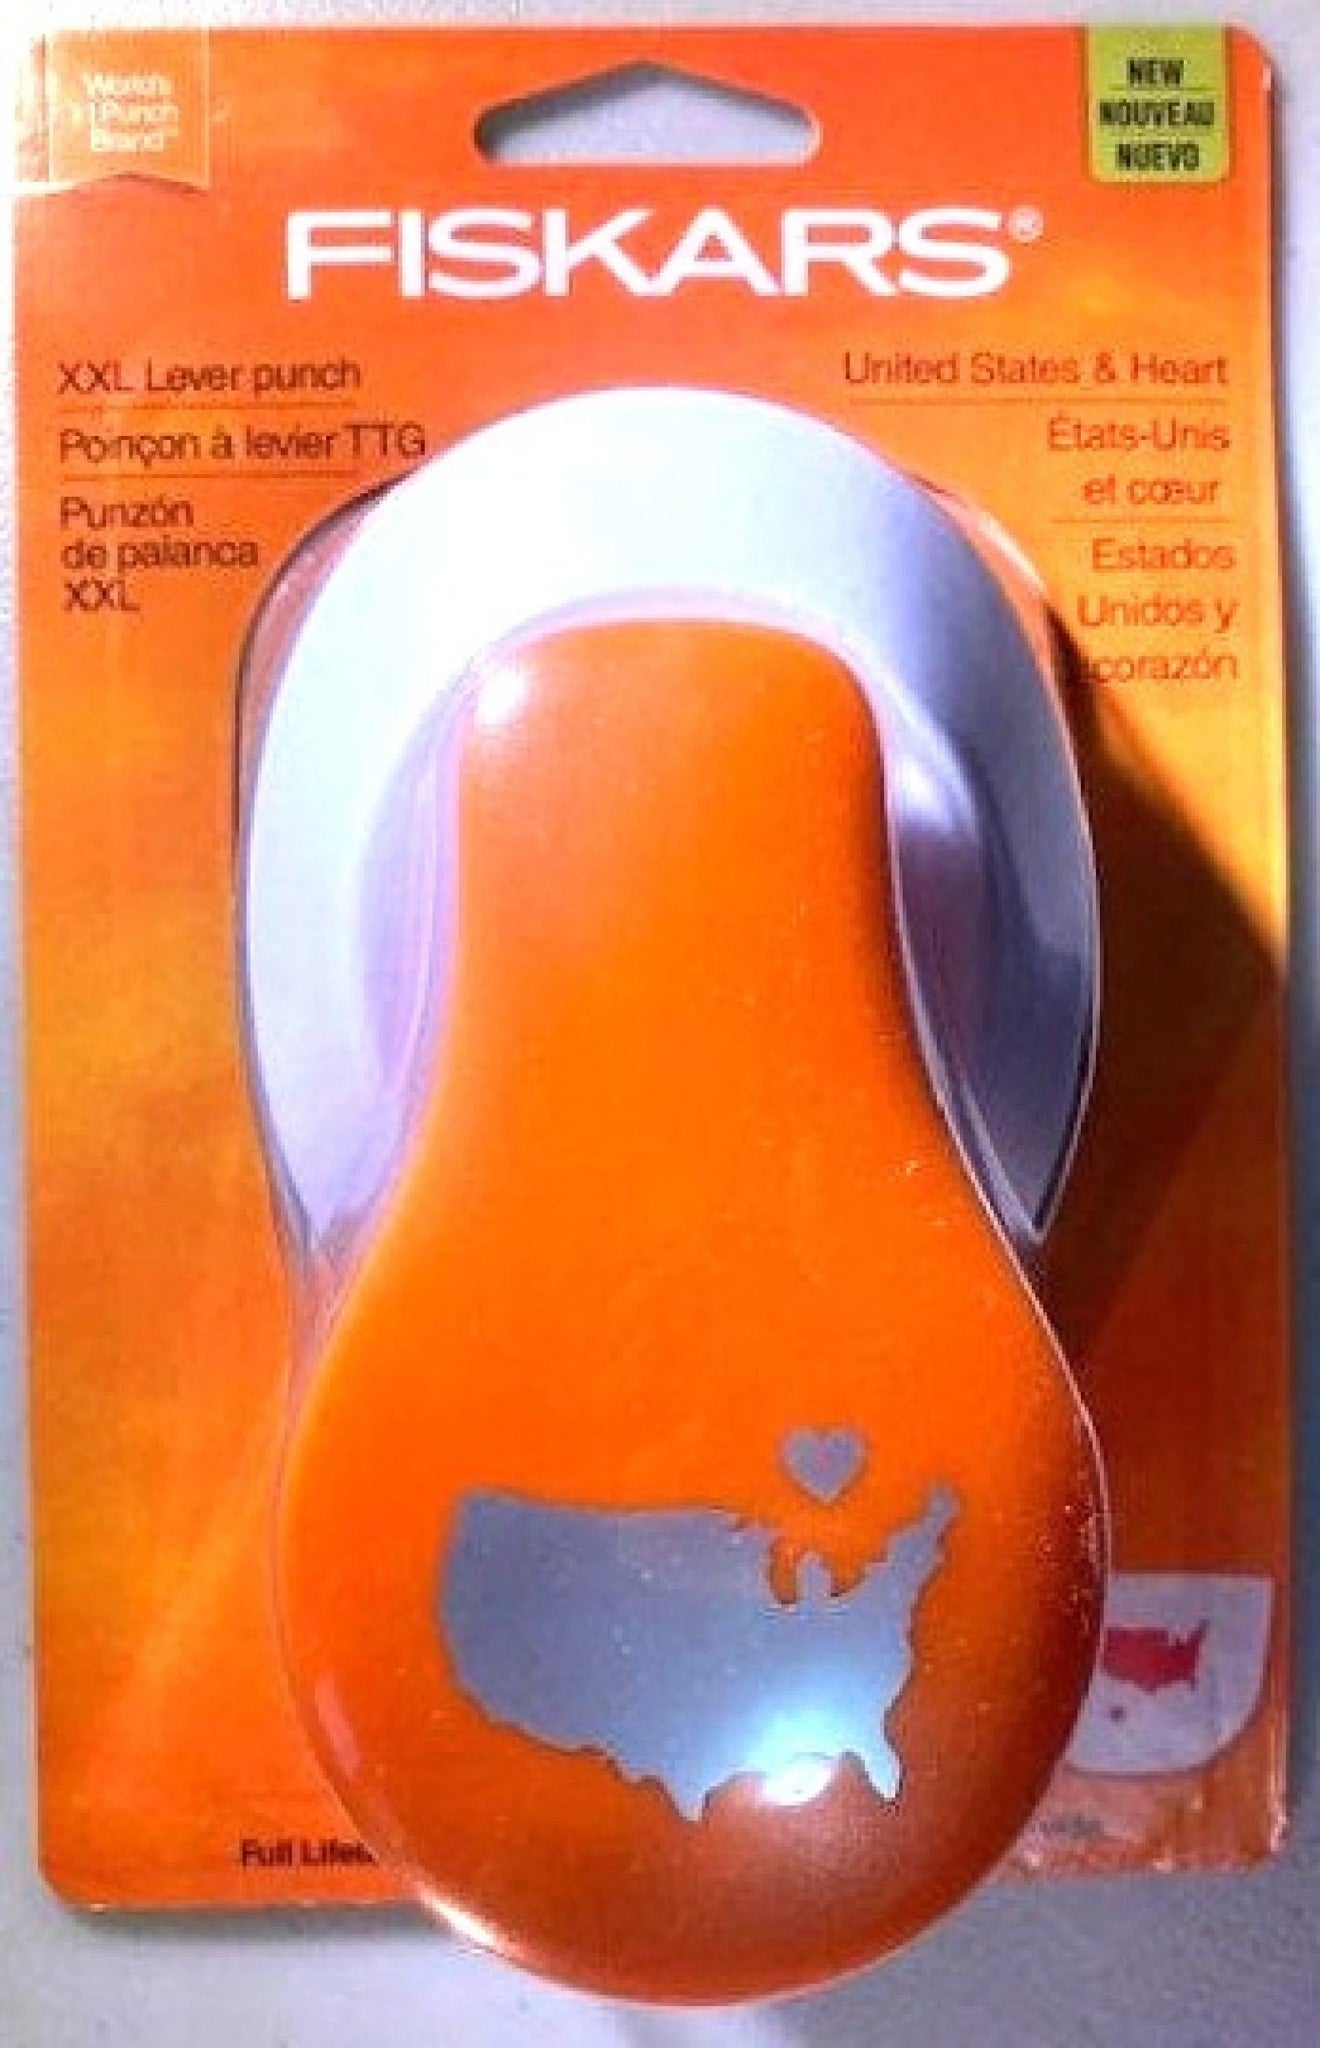 Fiskars 107310 Paper Craft Punch Lever XXL LARGE United States w/ Heart